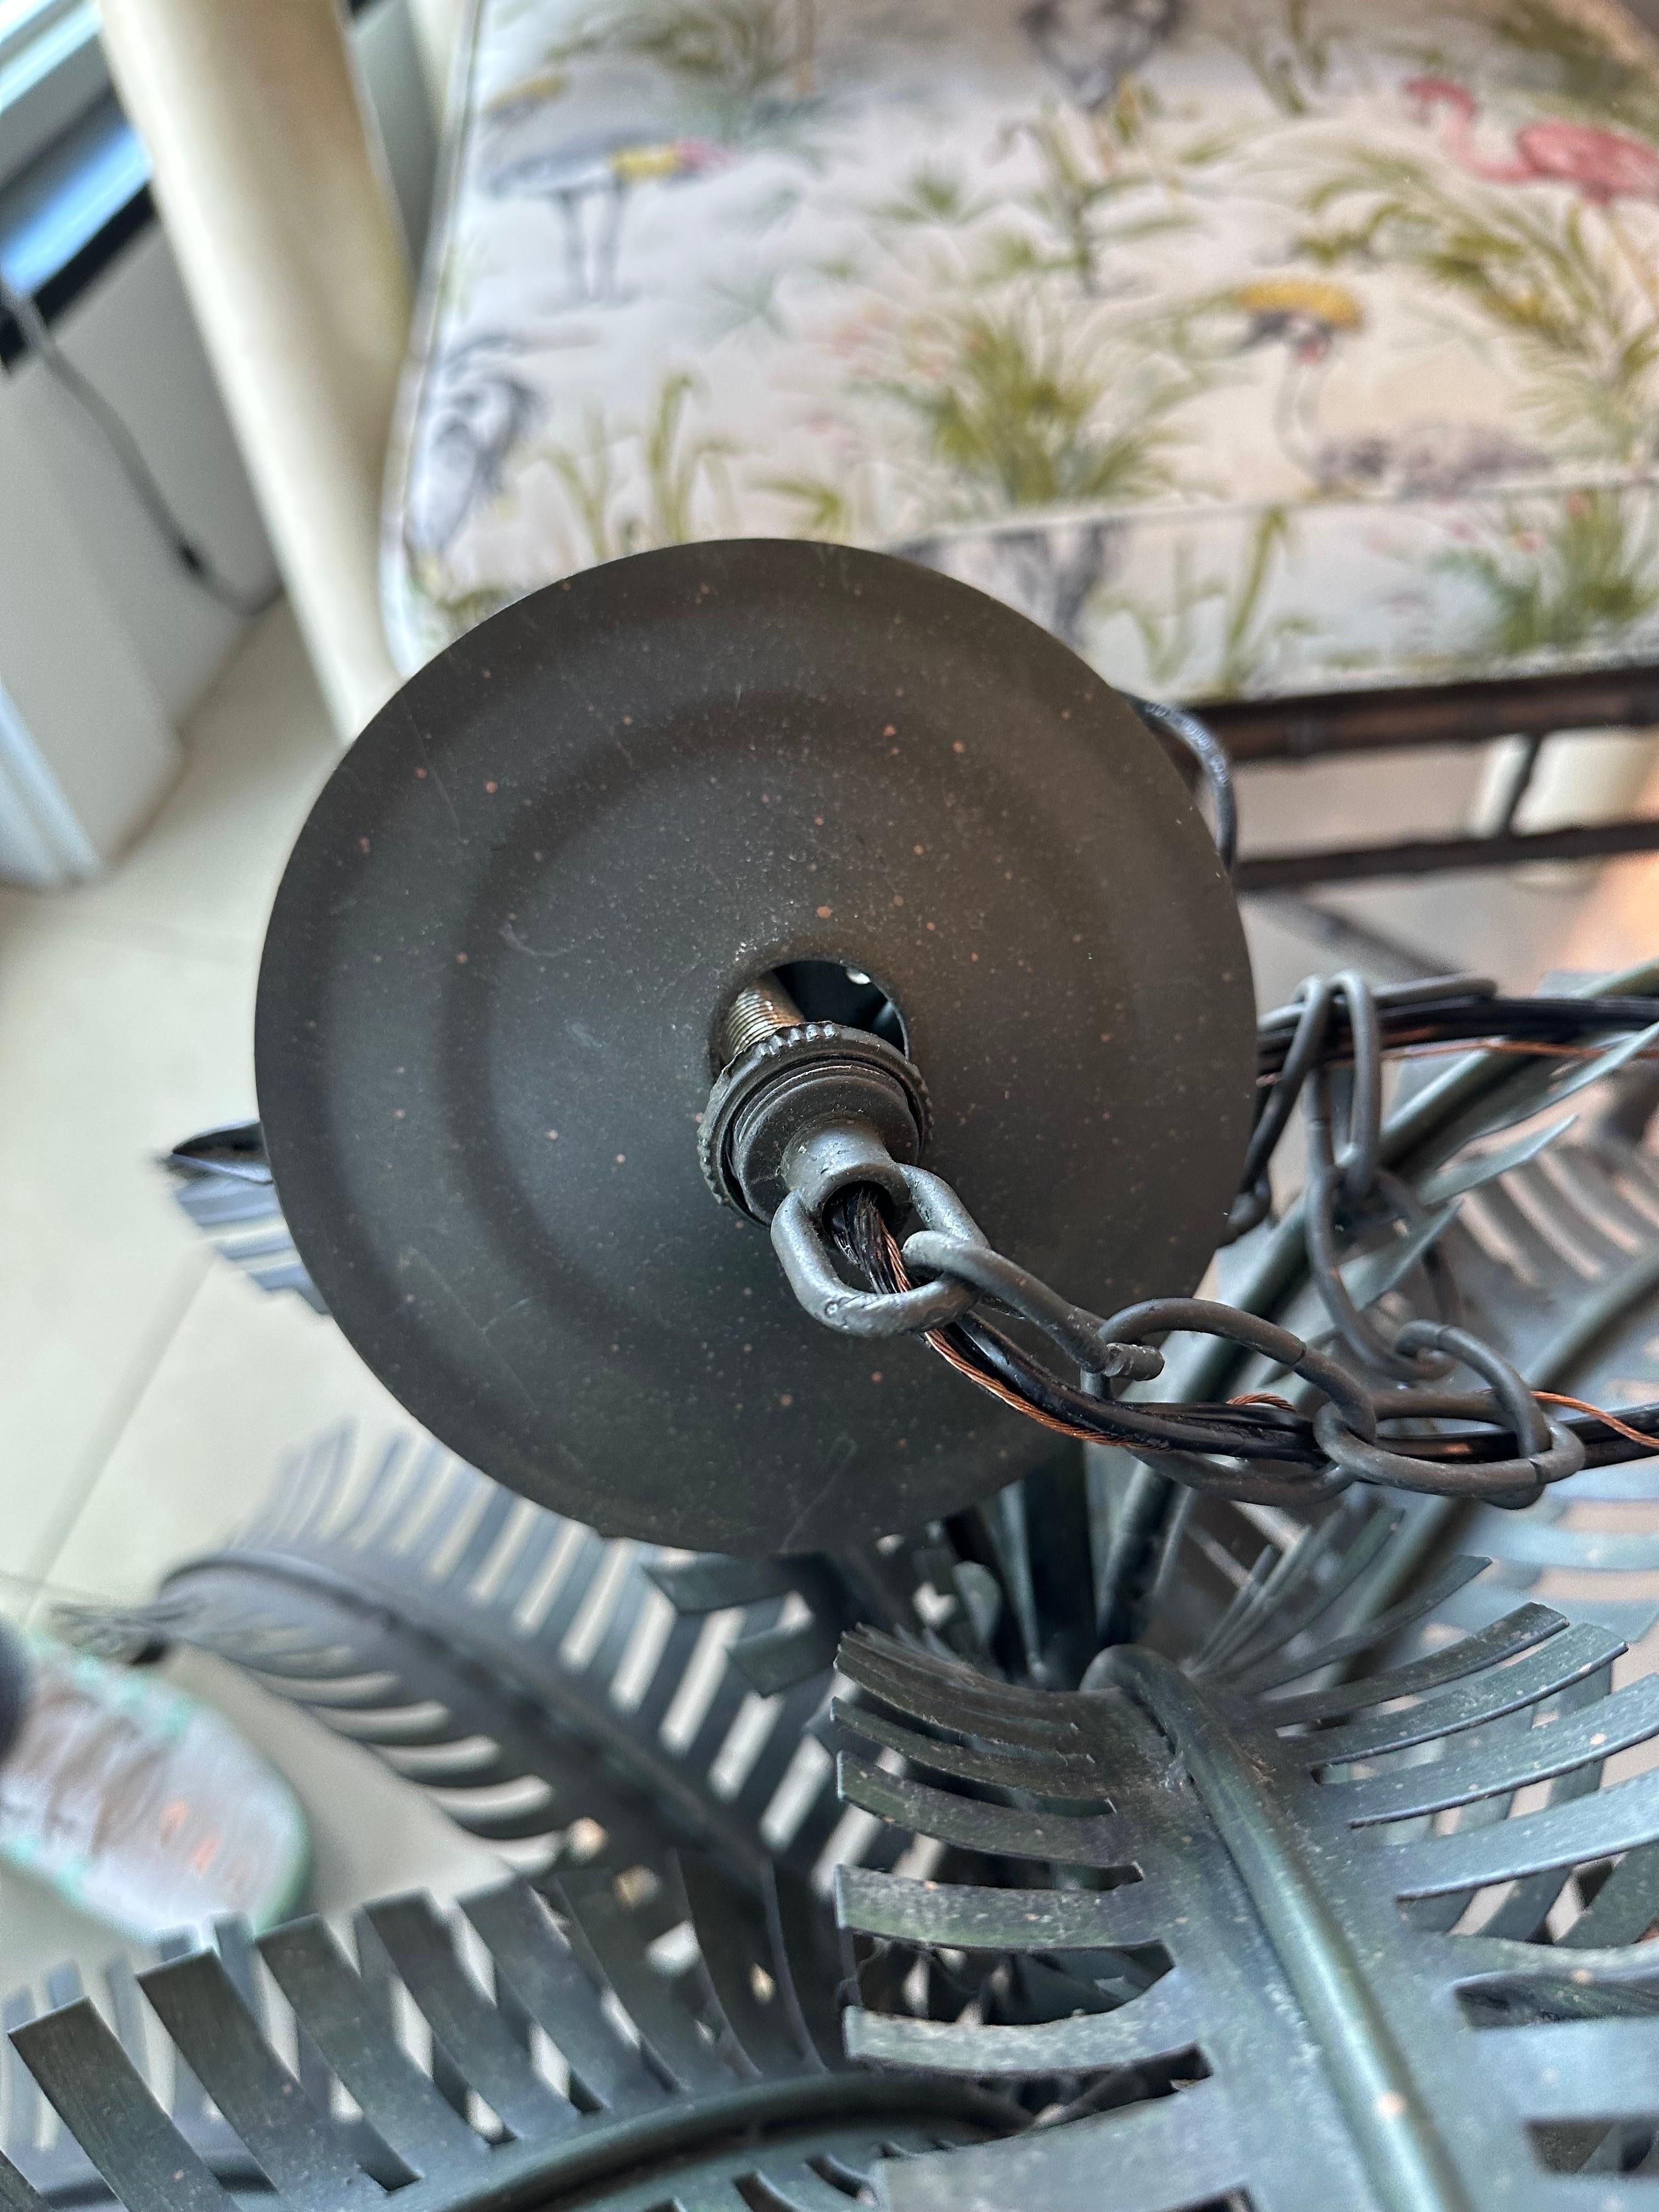 Vintage metal tole palm tree leaf frond 12 light chandelier. Tested and working order. Dimensions: 34 H x 31 D. Comes with original ceiling cap.